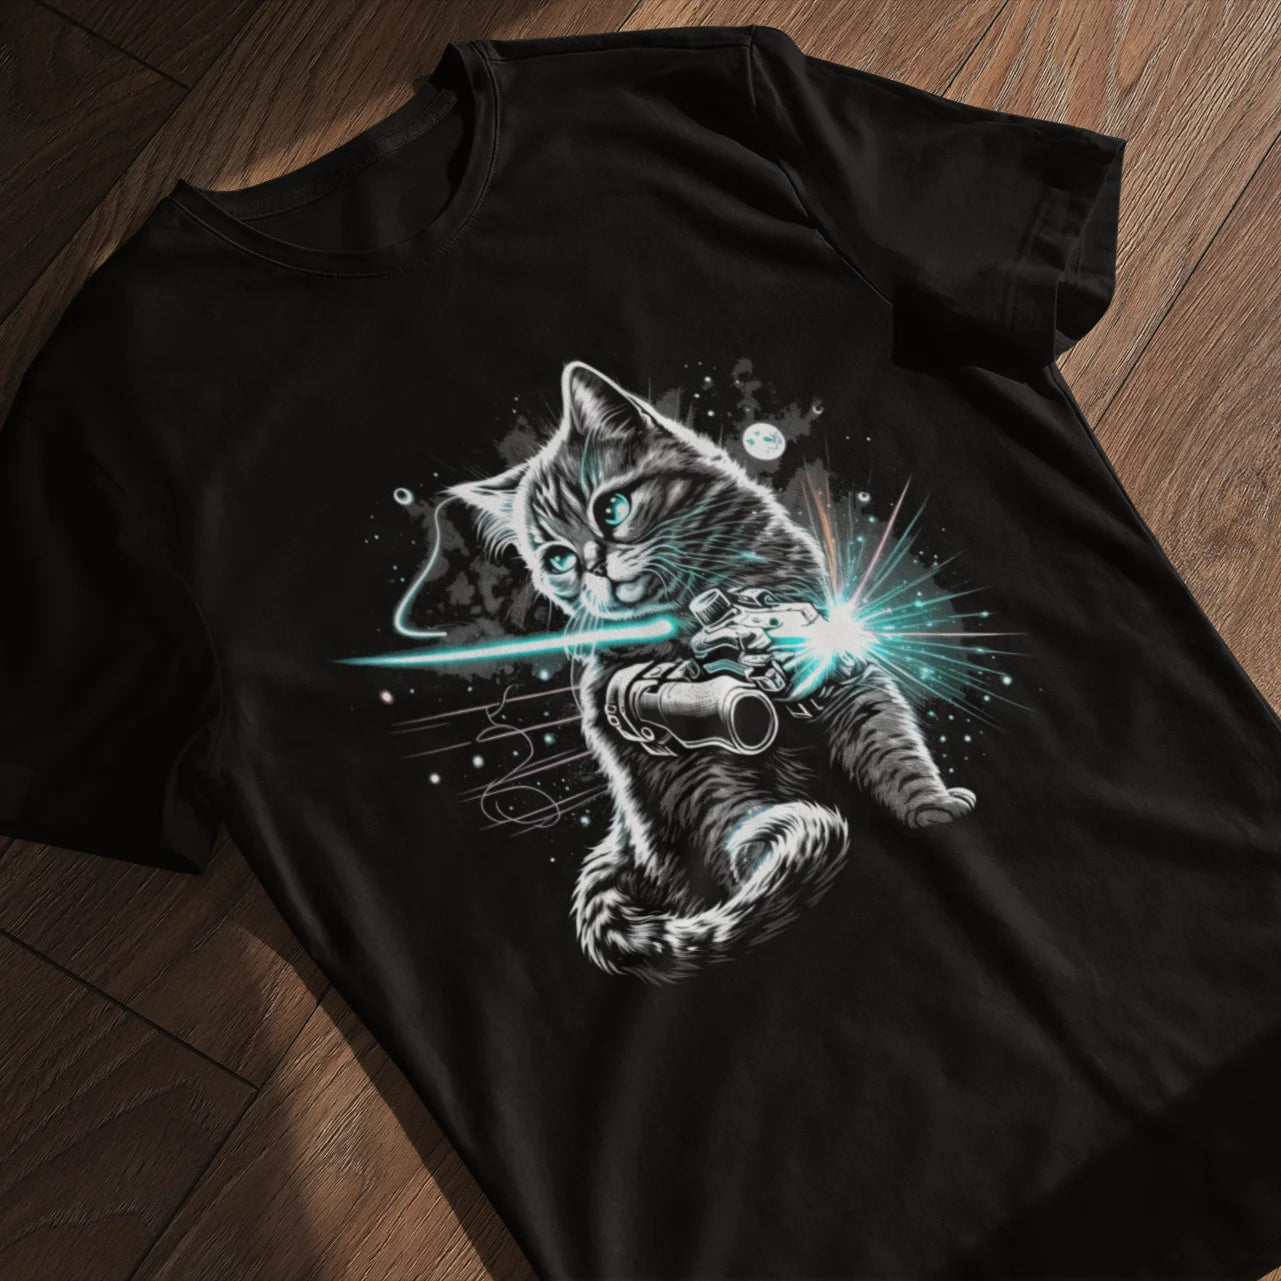 psychedelicBRANDz's Starlight Saberclaw featuring a warrior space cat on a black shirt